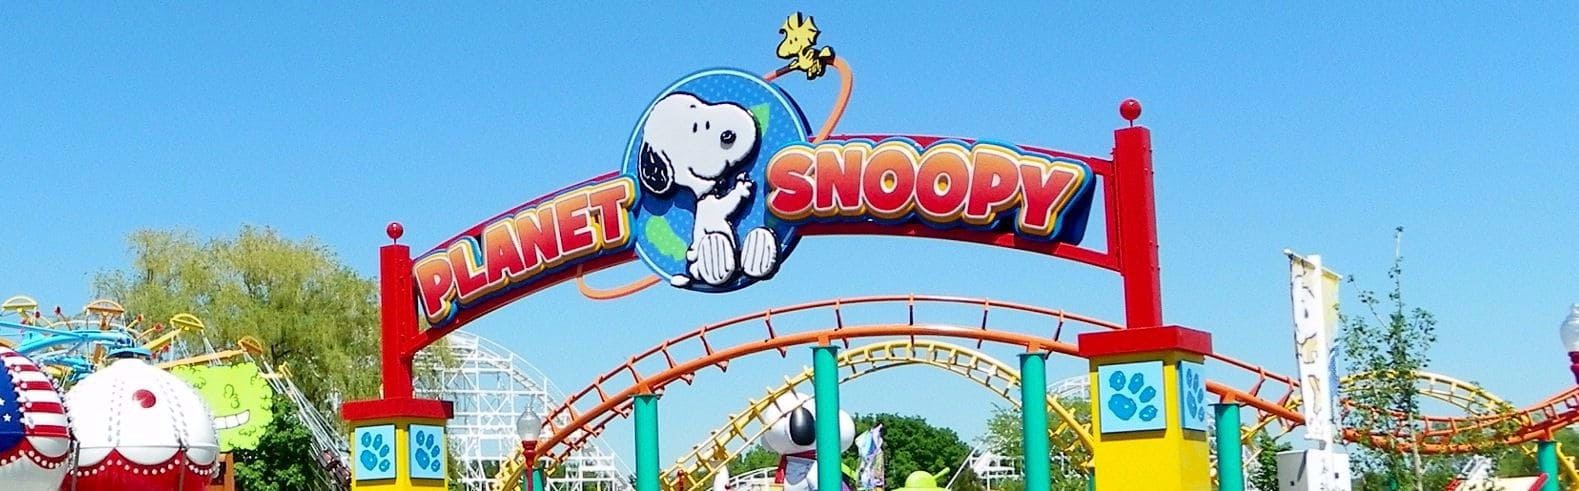 Theme park sign for Planet Snoop by Ortwein Sign